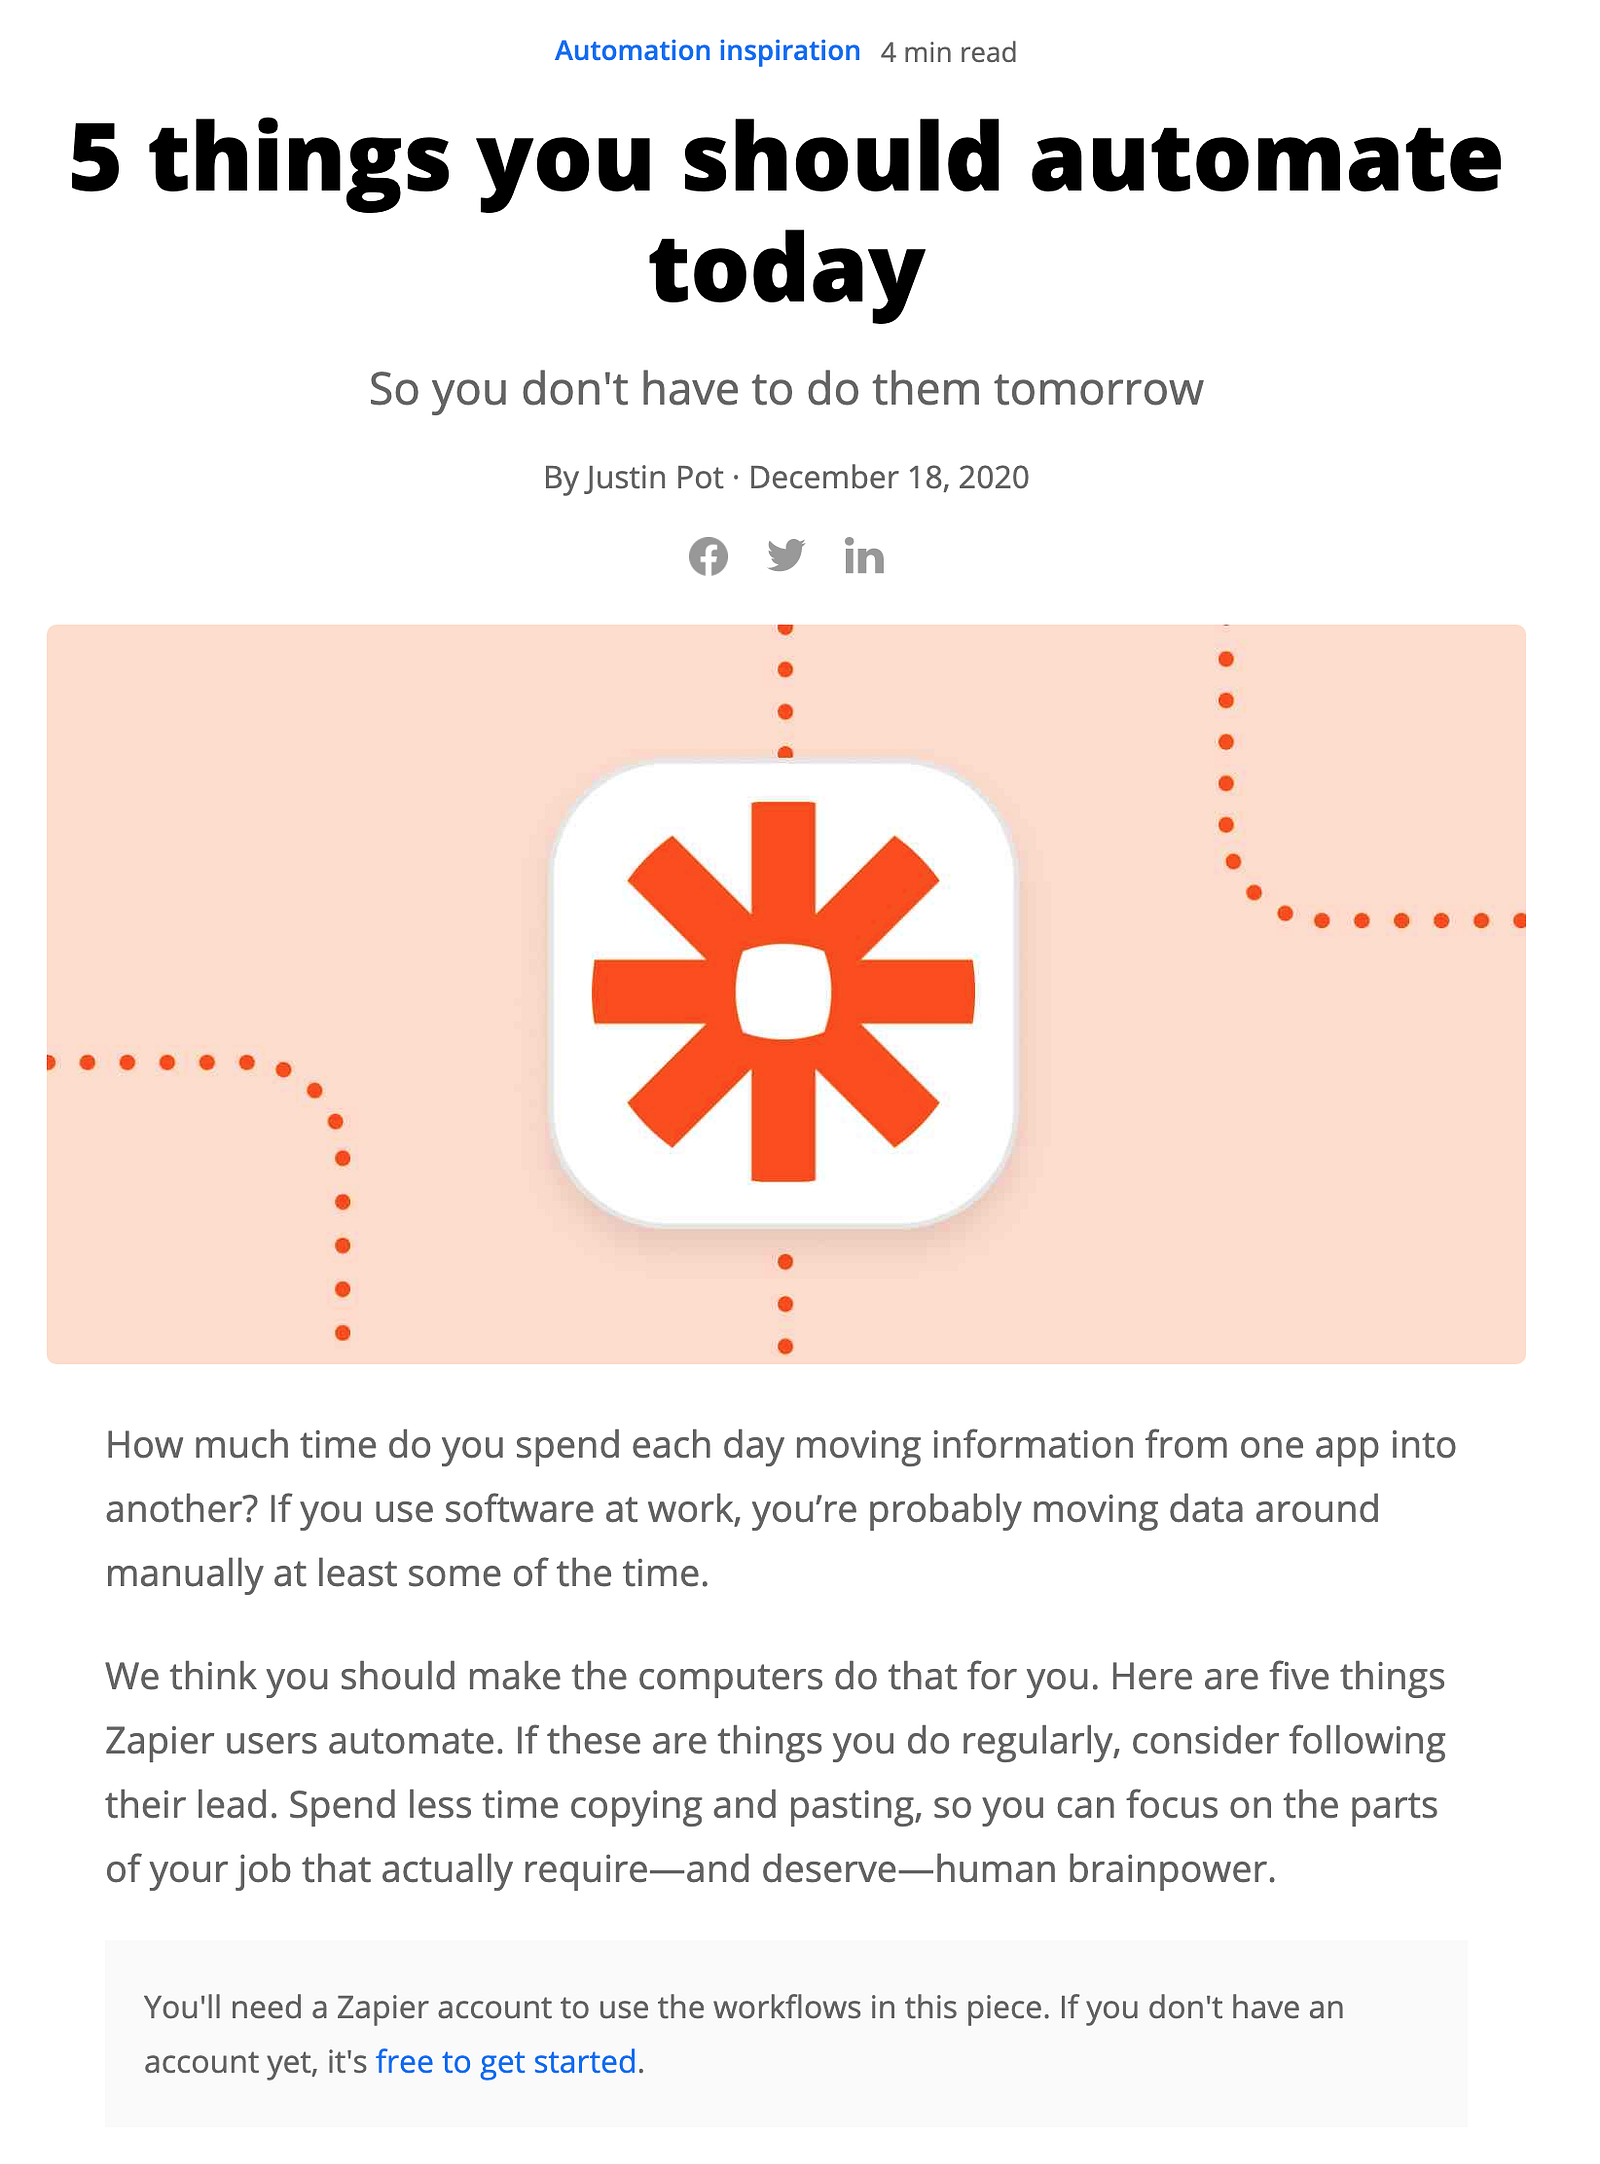 The page zapier sends you to after clicking the call to action on the email above.